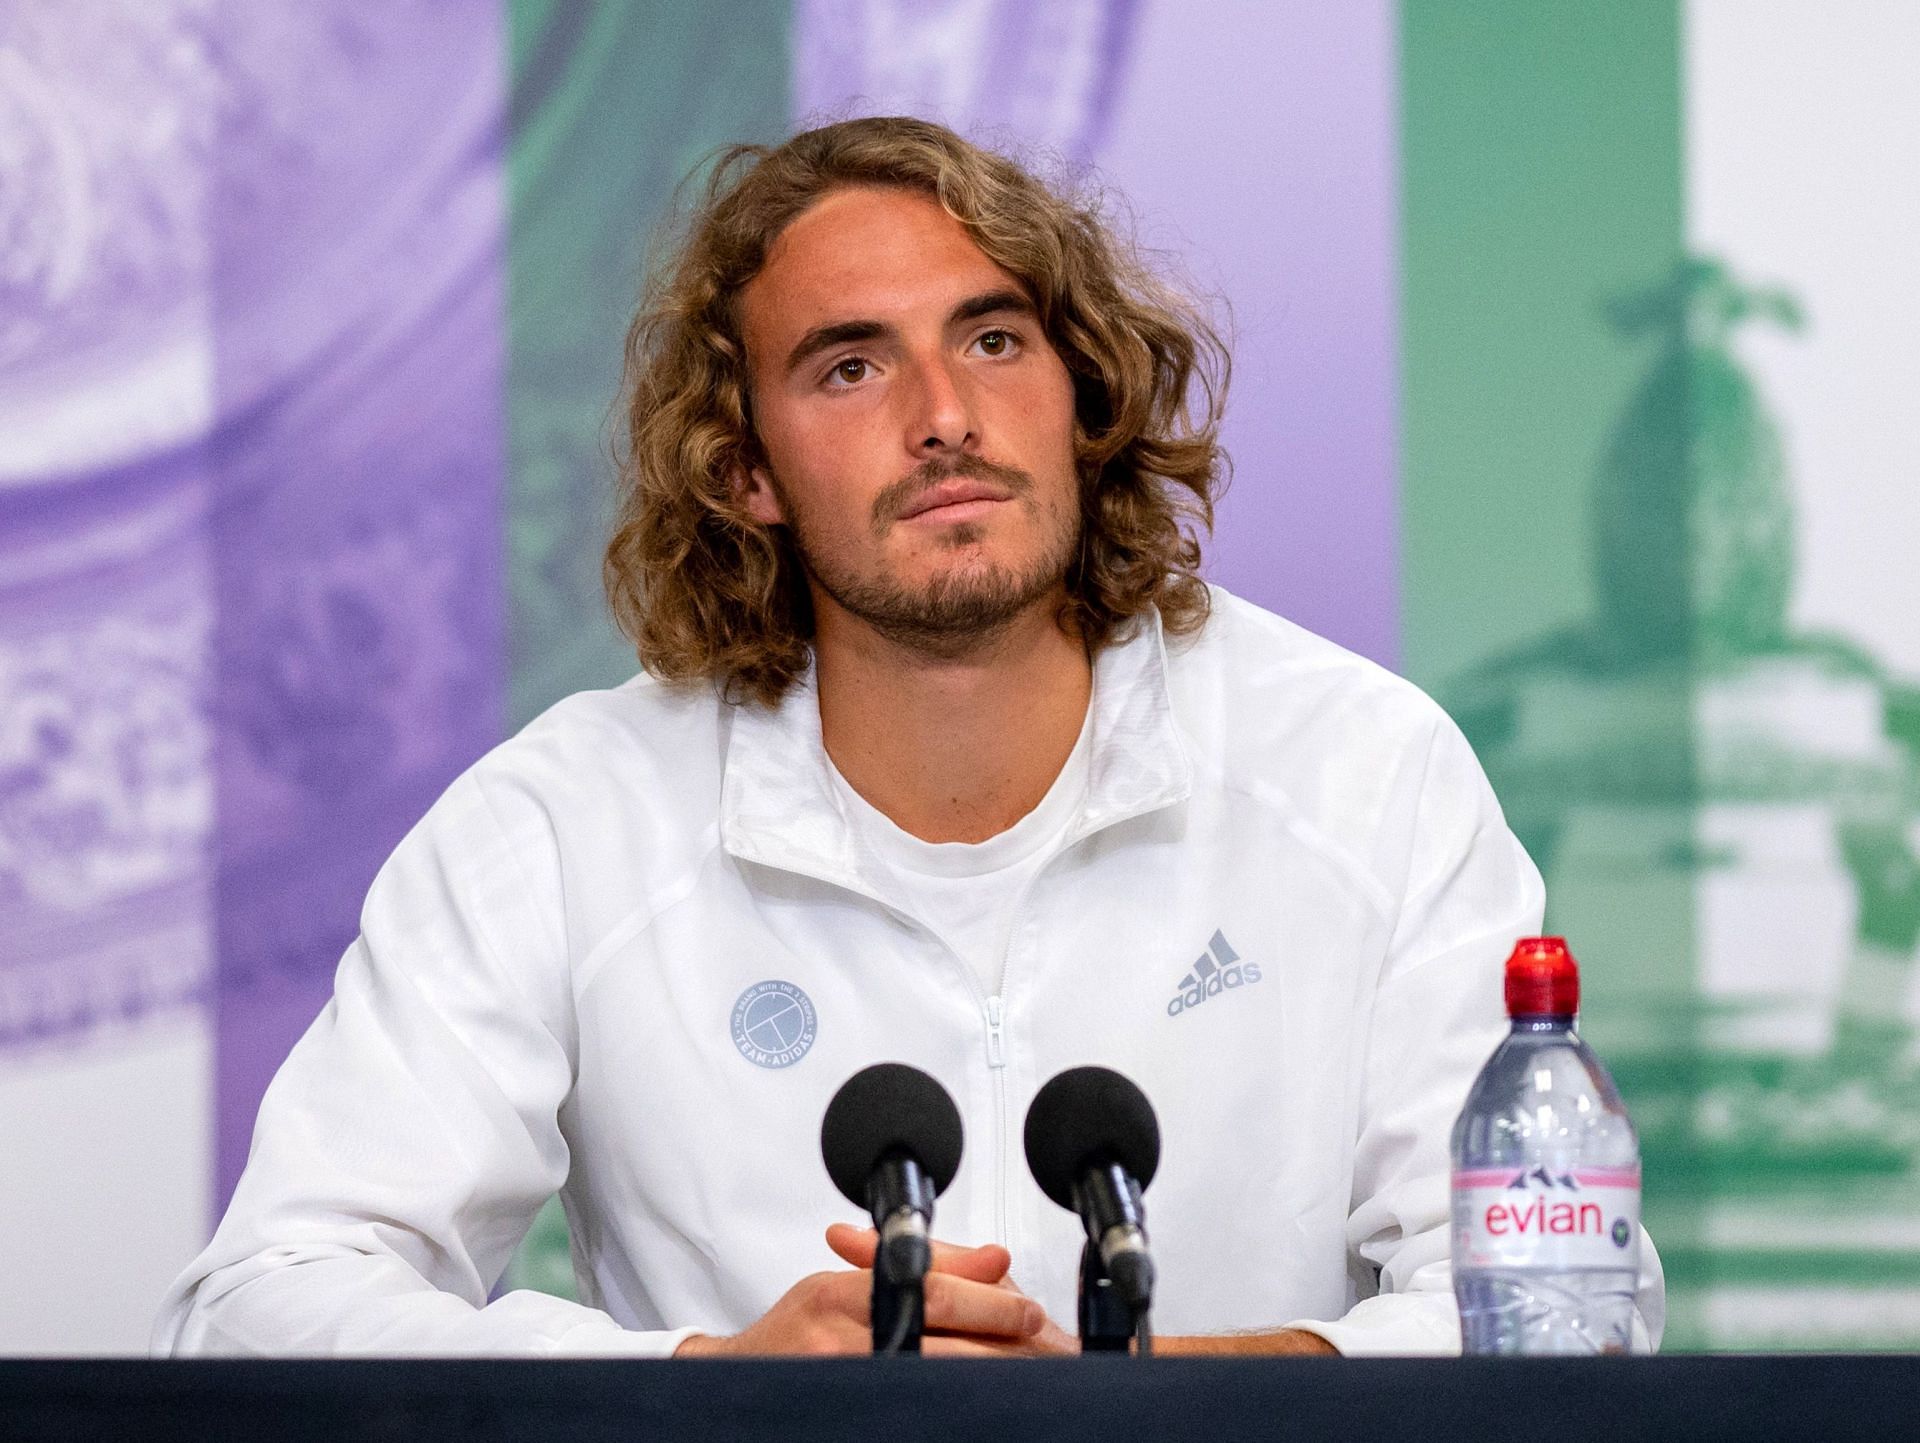 Stefanos Tsitsipas was fairly neutral about all four Grand Slams adopting the new tiebreaker rule